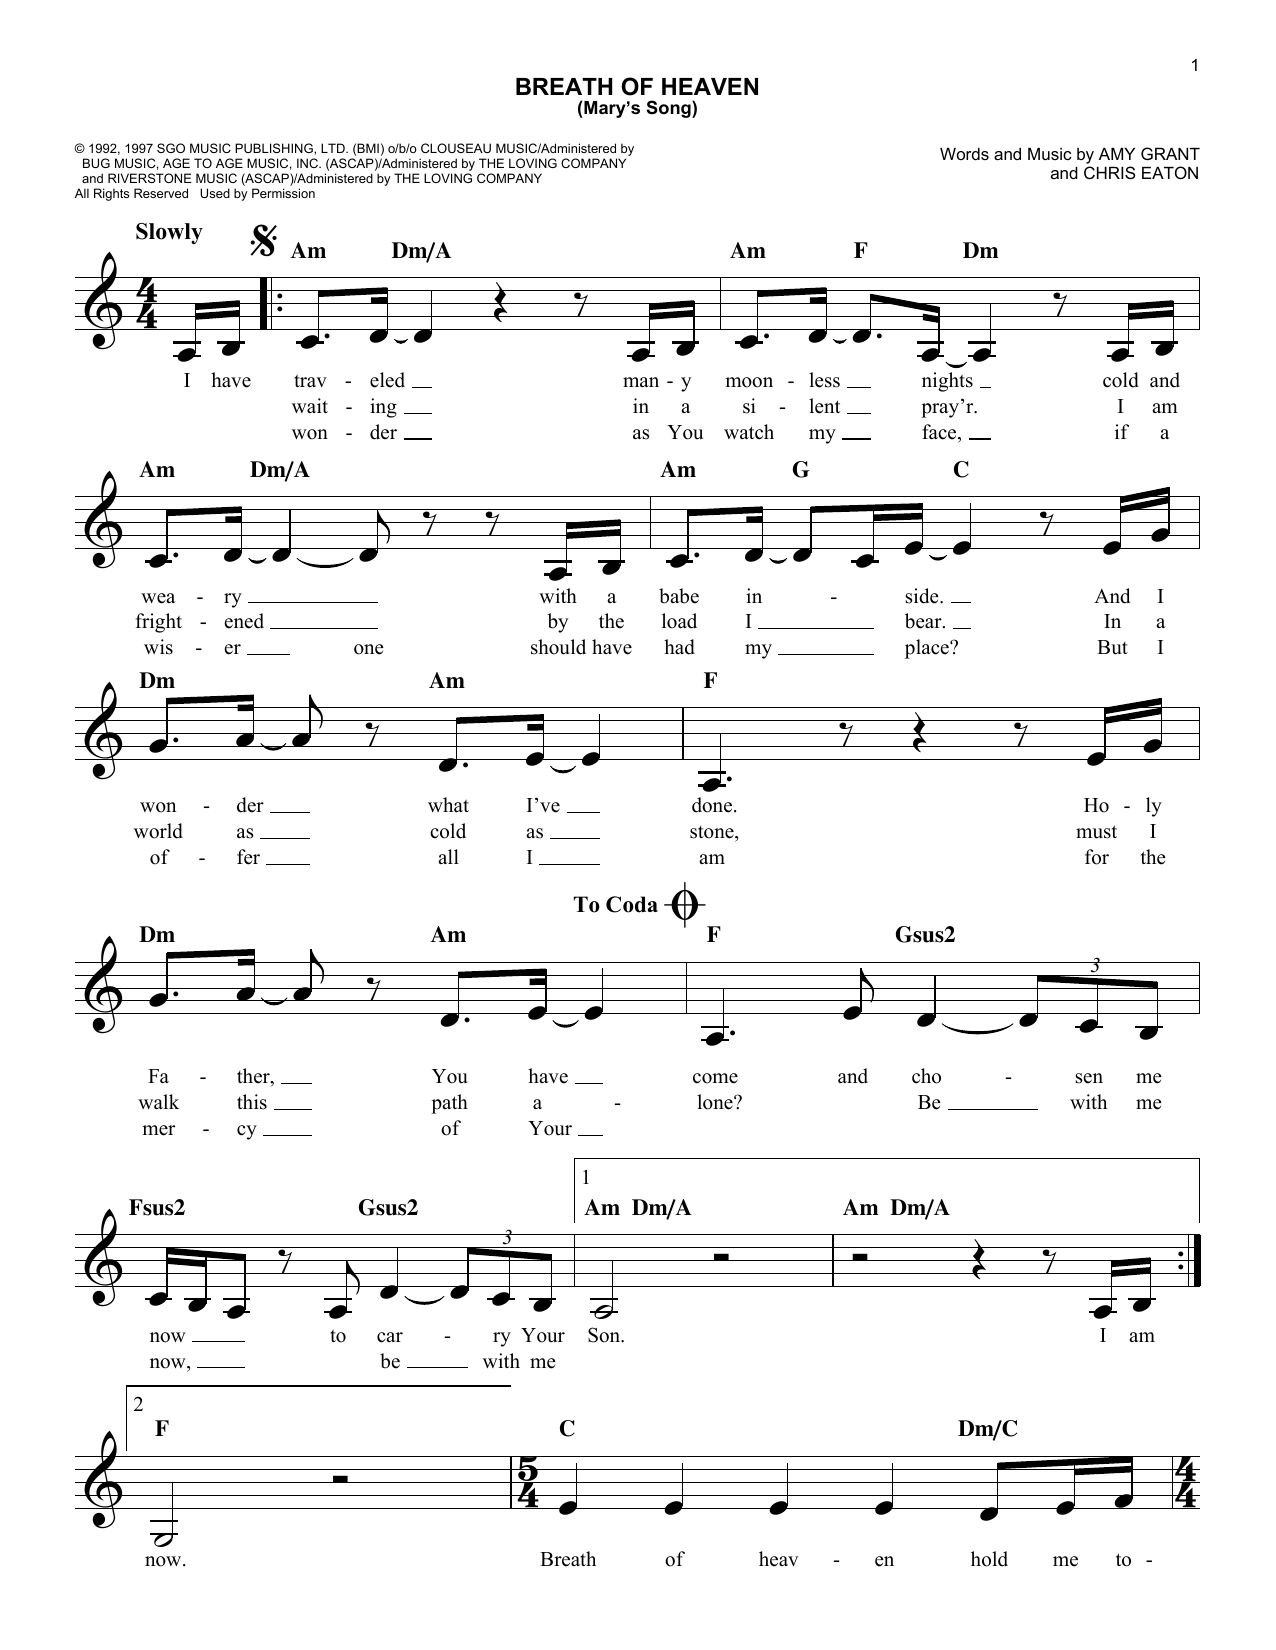 Download Amy Grant Breath Of Heaven (Mary's Song) Sheet Music